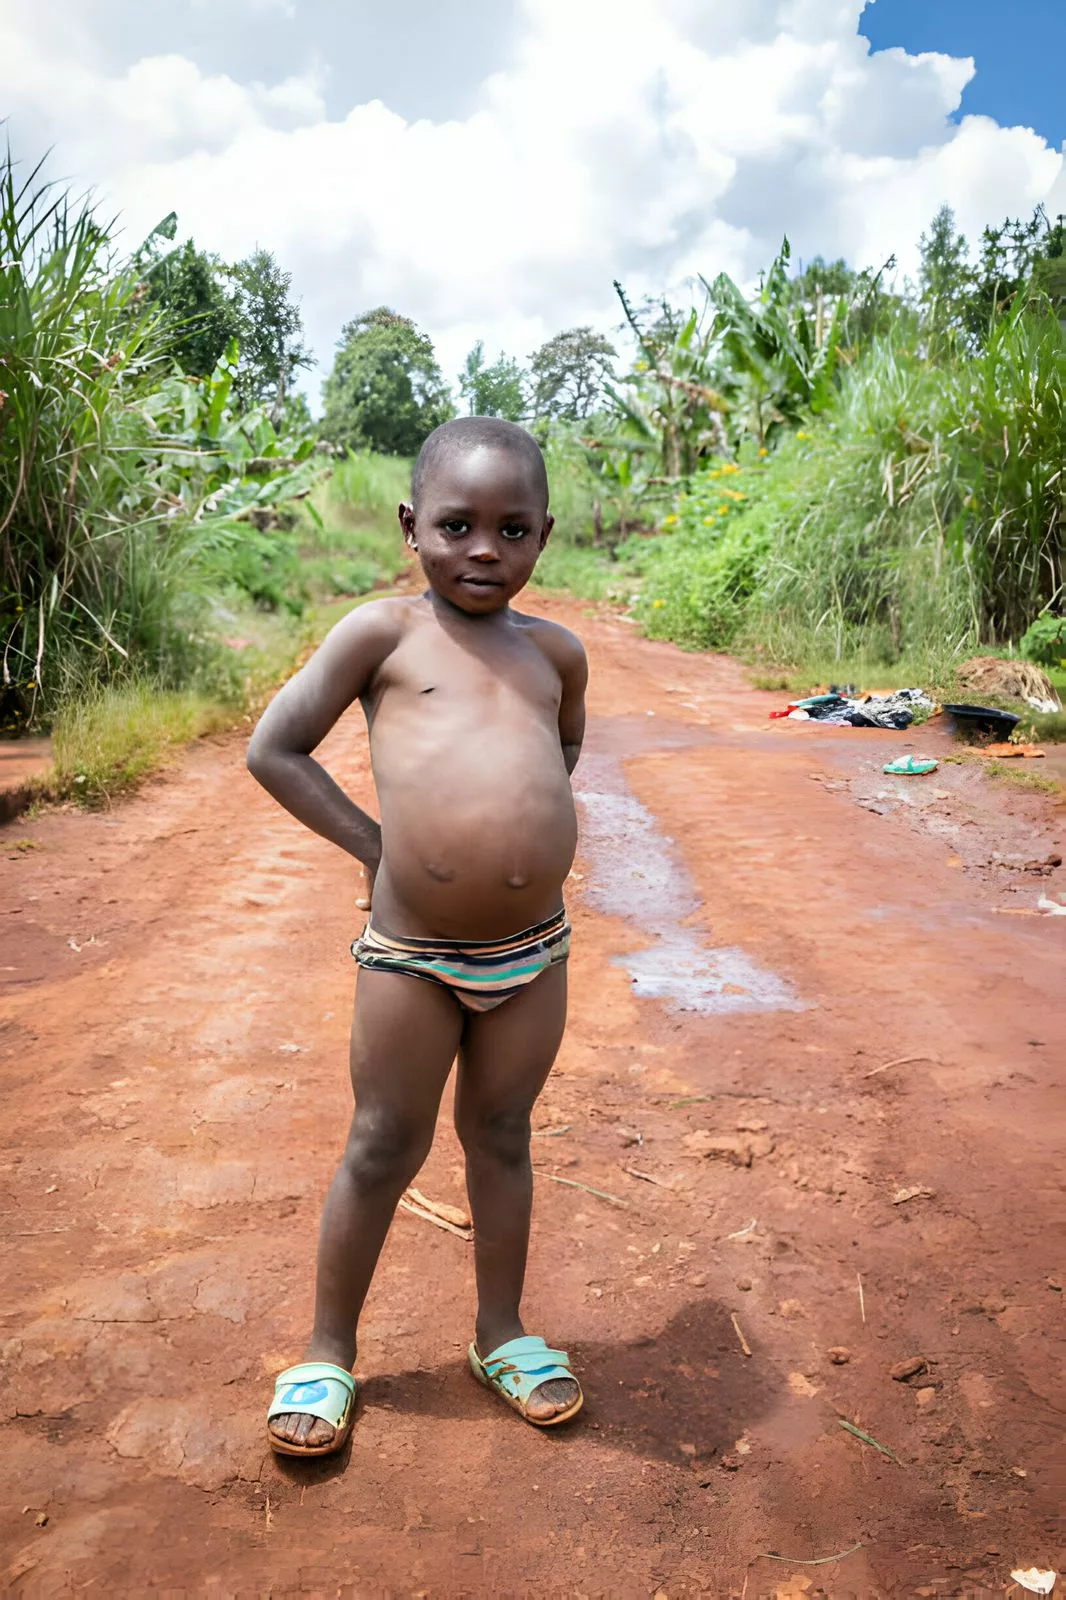 A child with kwashiorkor symptoms like protruded belly